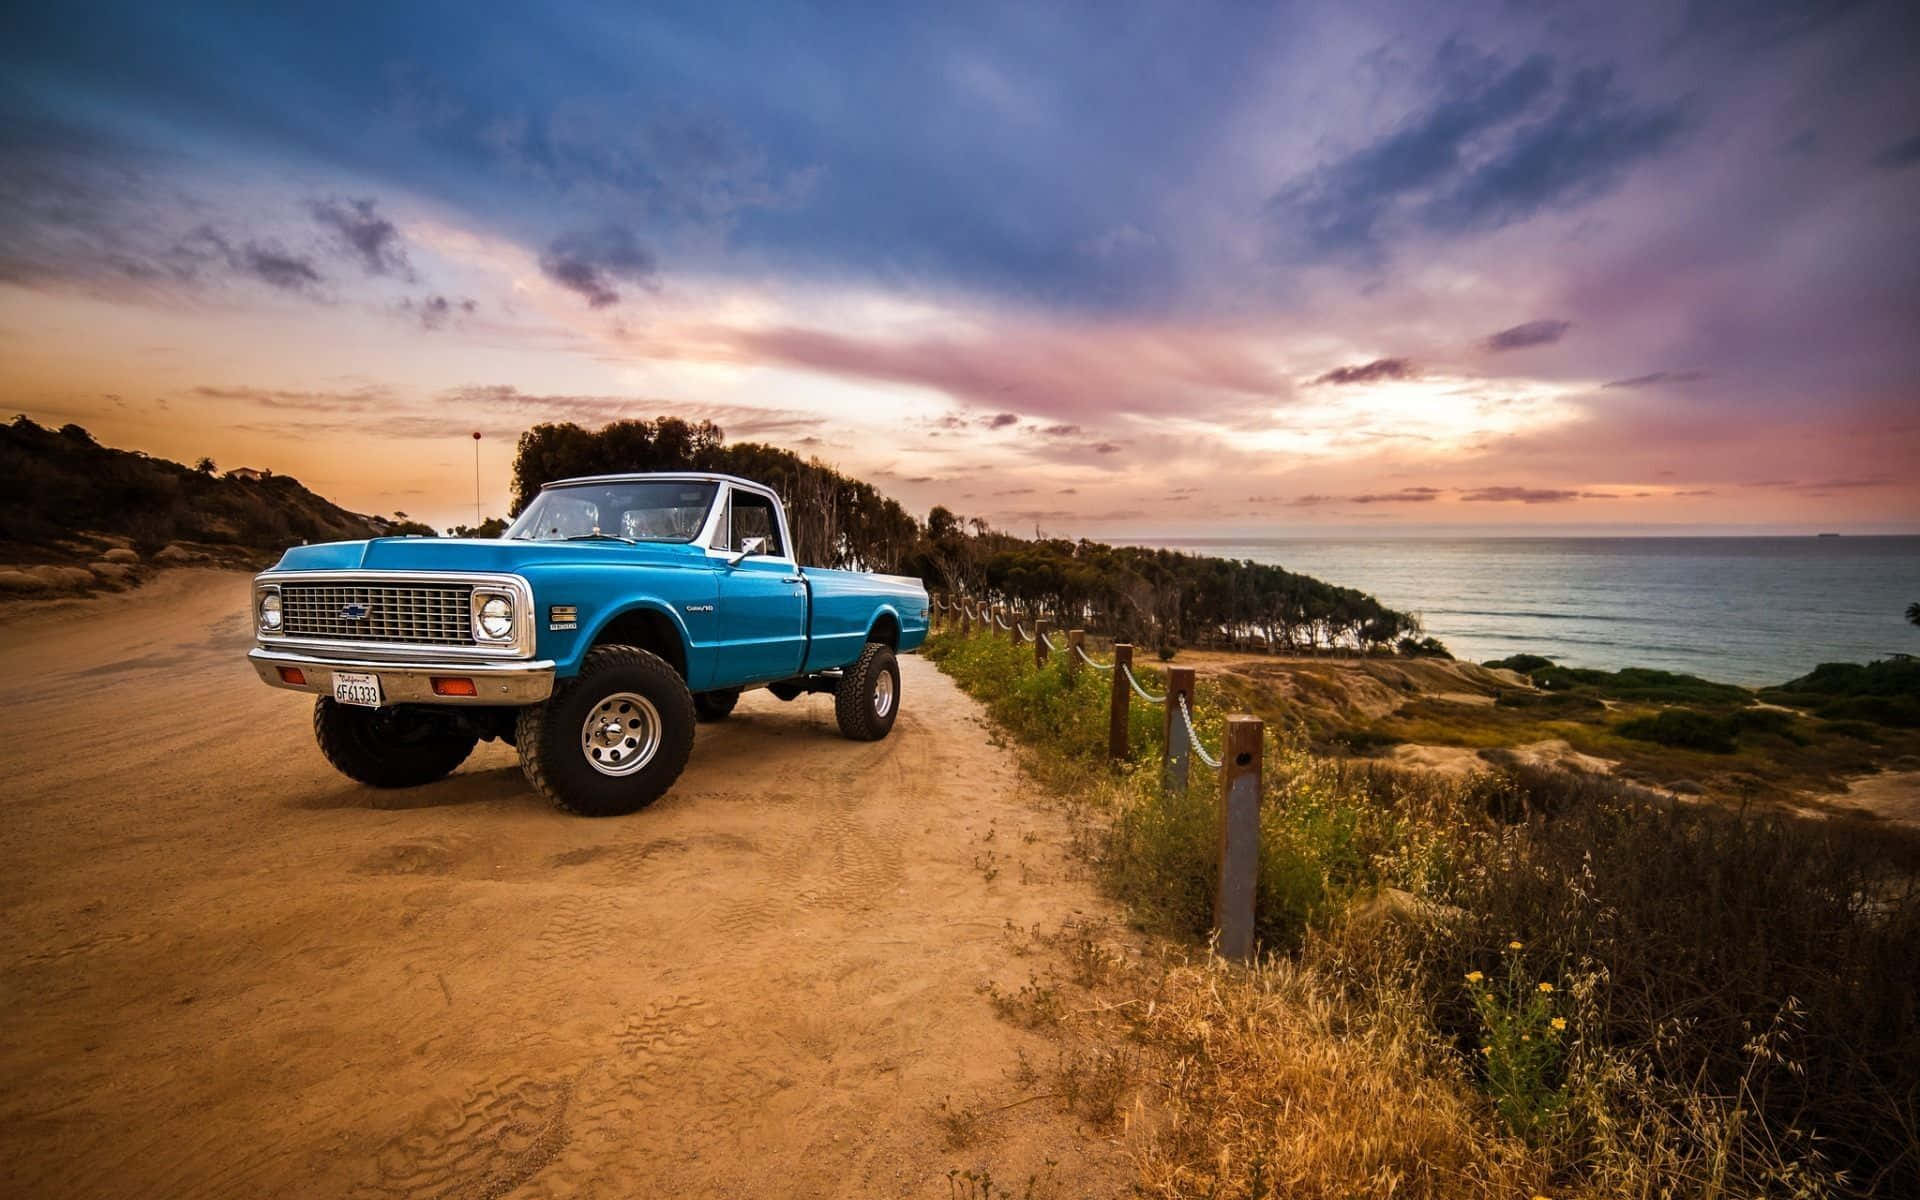 A Blue Truck Is Parked On A Dirt Road Near The Ocean